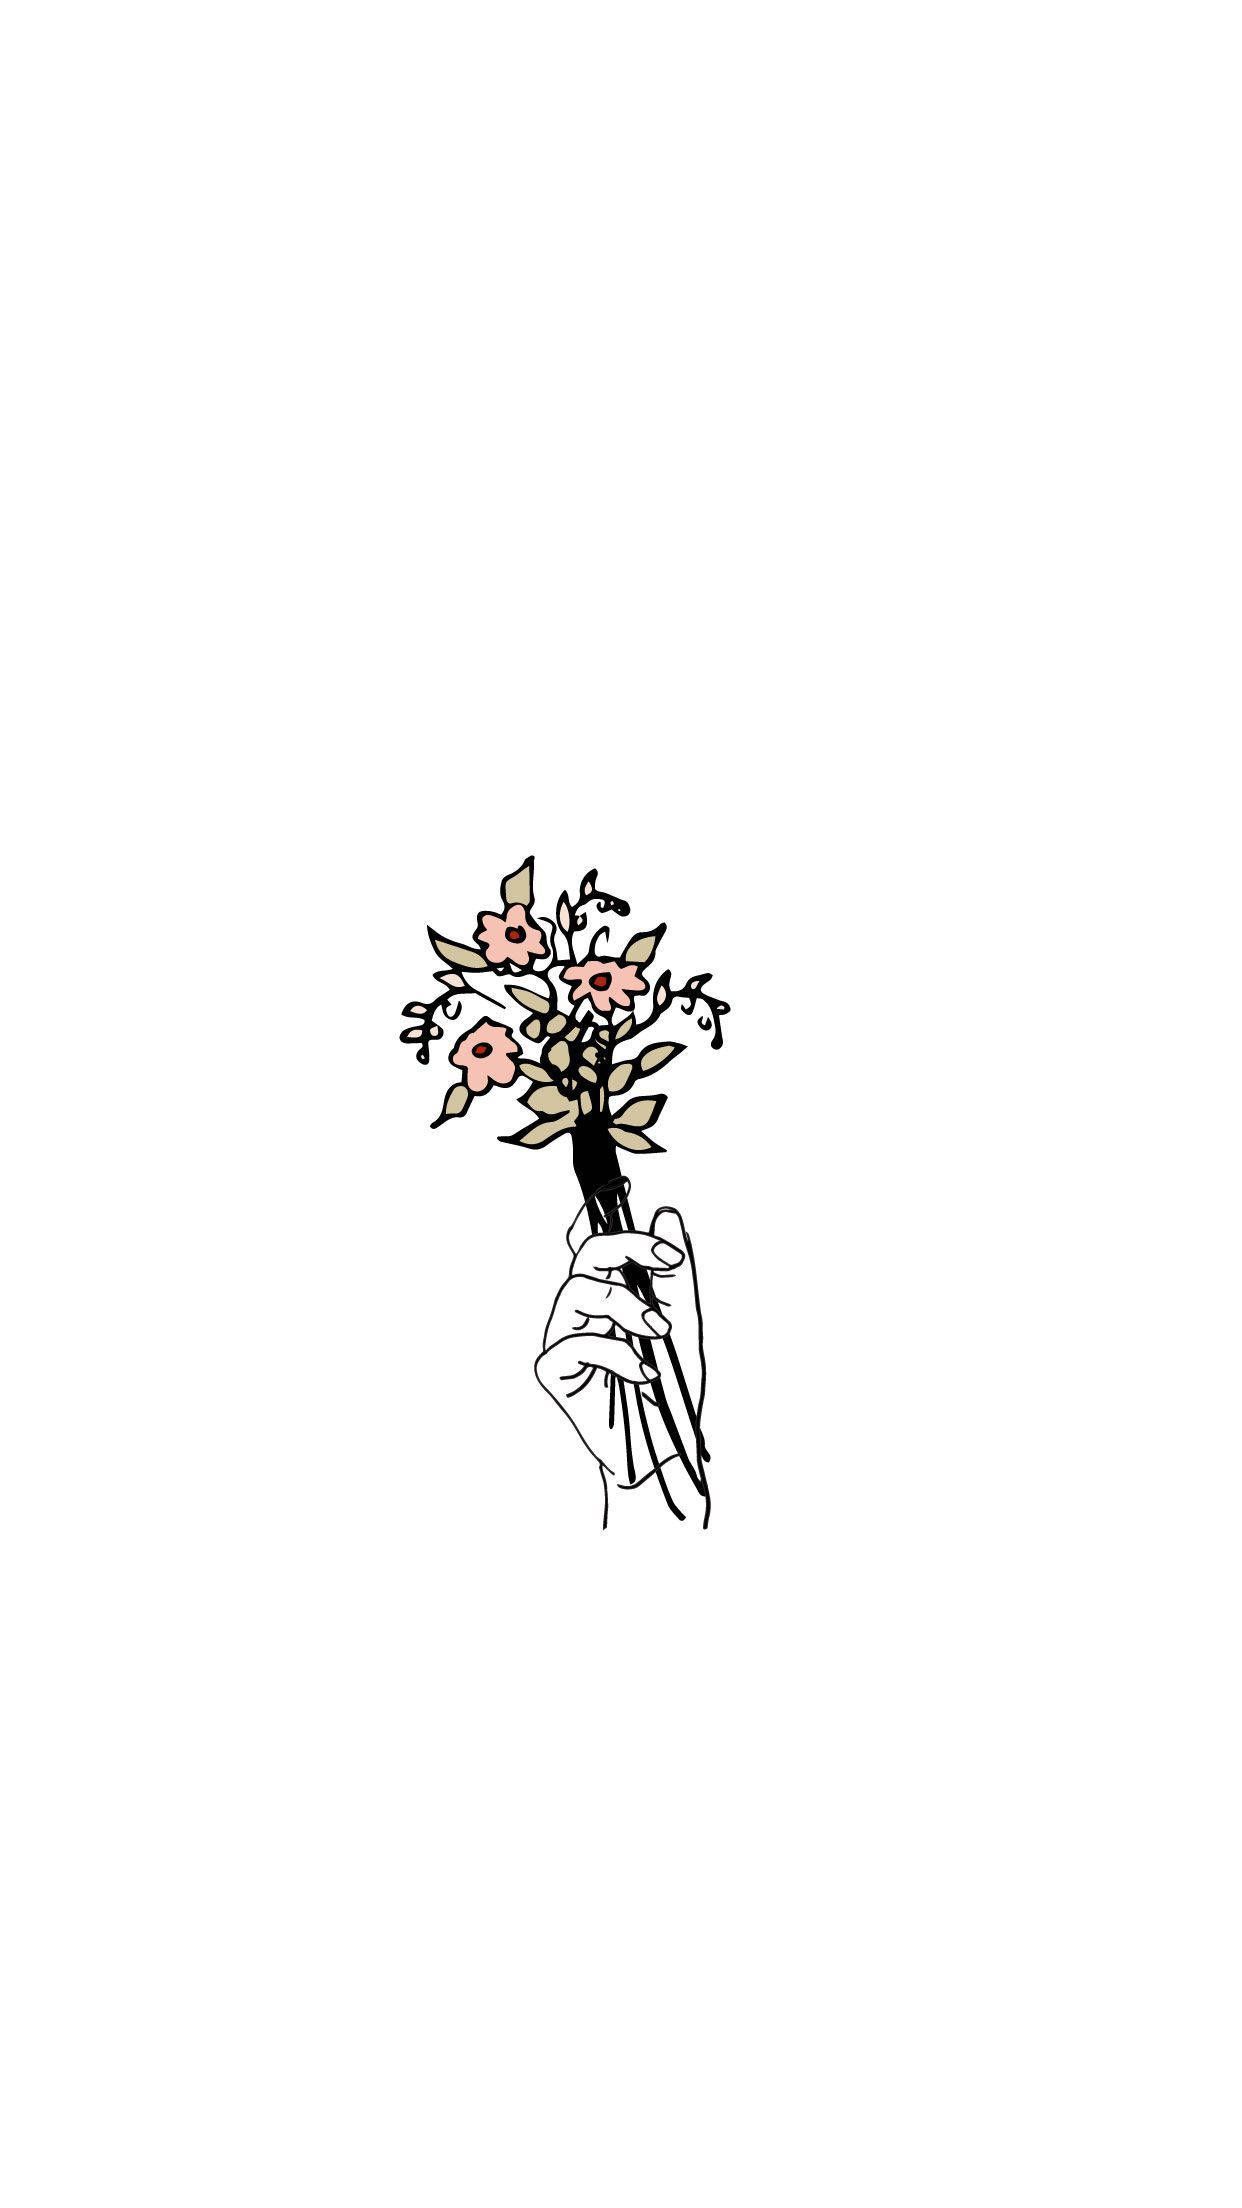 A drawing of someone holding flowers in their hand - White, cute white